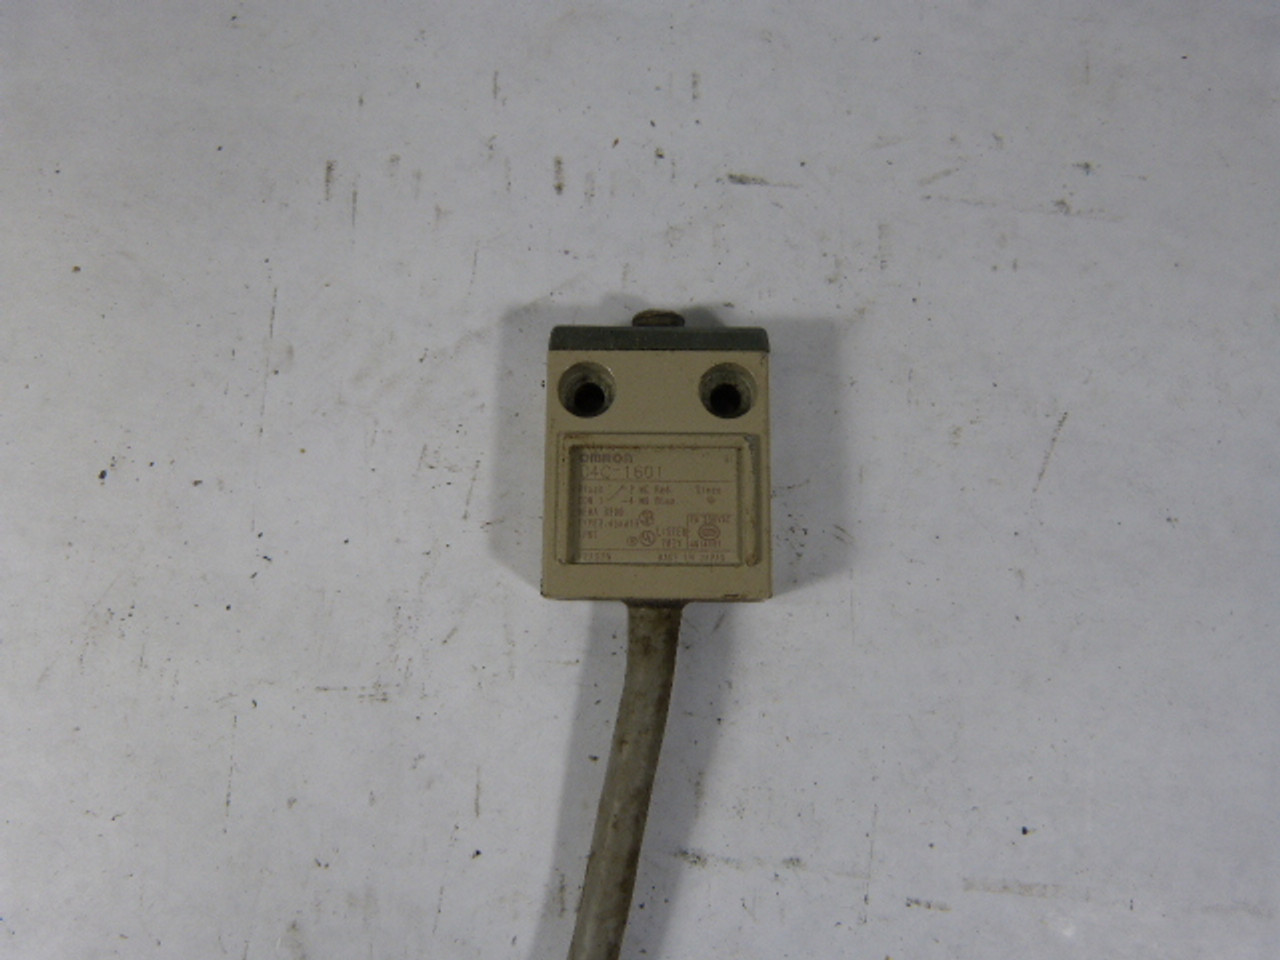 Omron D4C-1601 Limit Switch Pin Plunger 250V 2A COSMETIC DAMAGE/16" CABLE USED